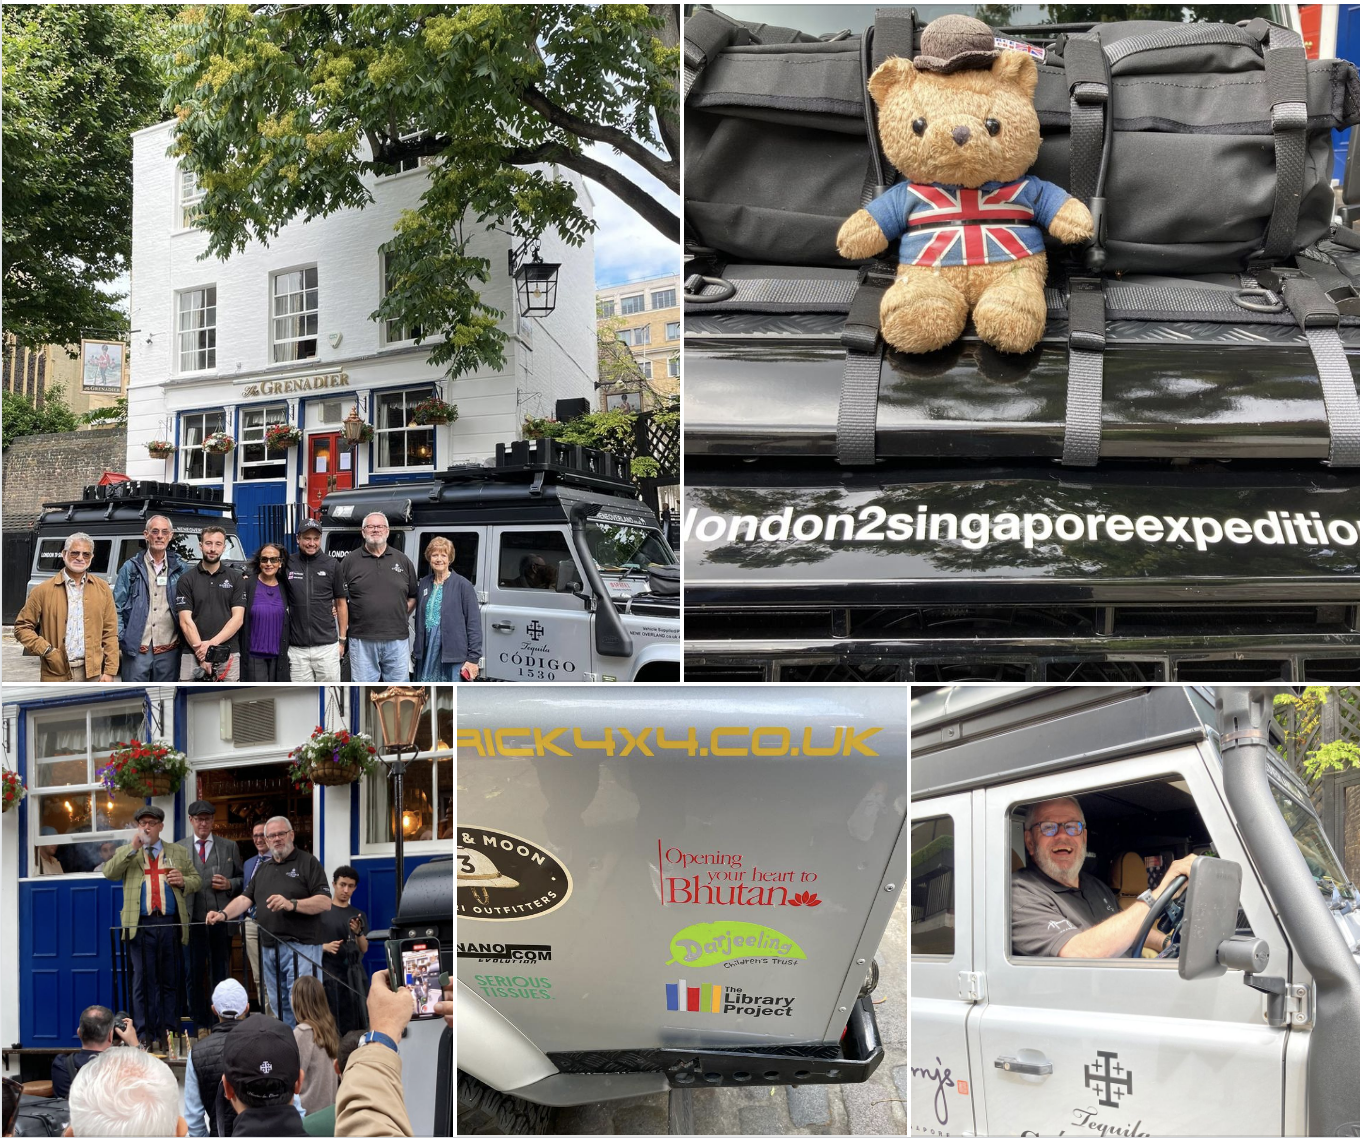 London2Singapore Land Rover Expedition – We Have Lift Off!